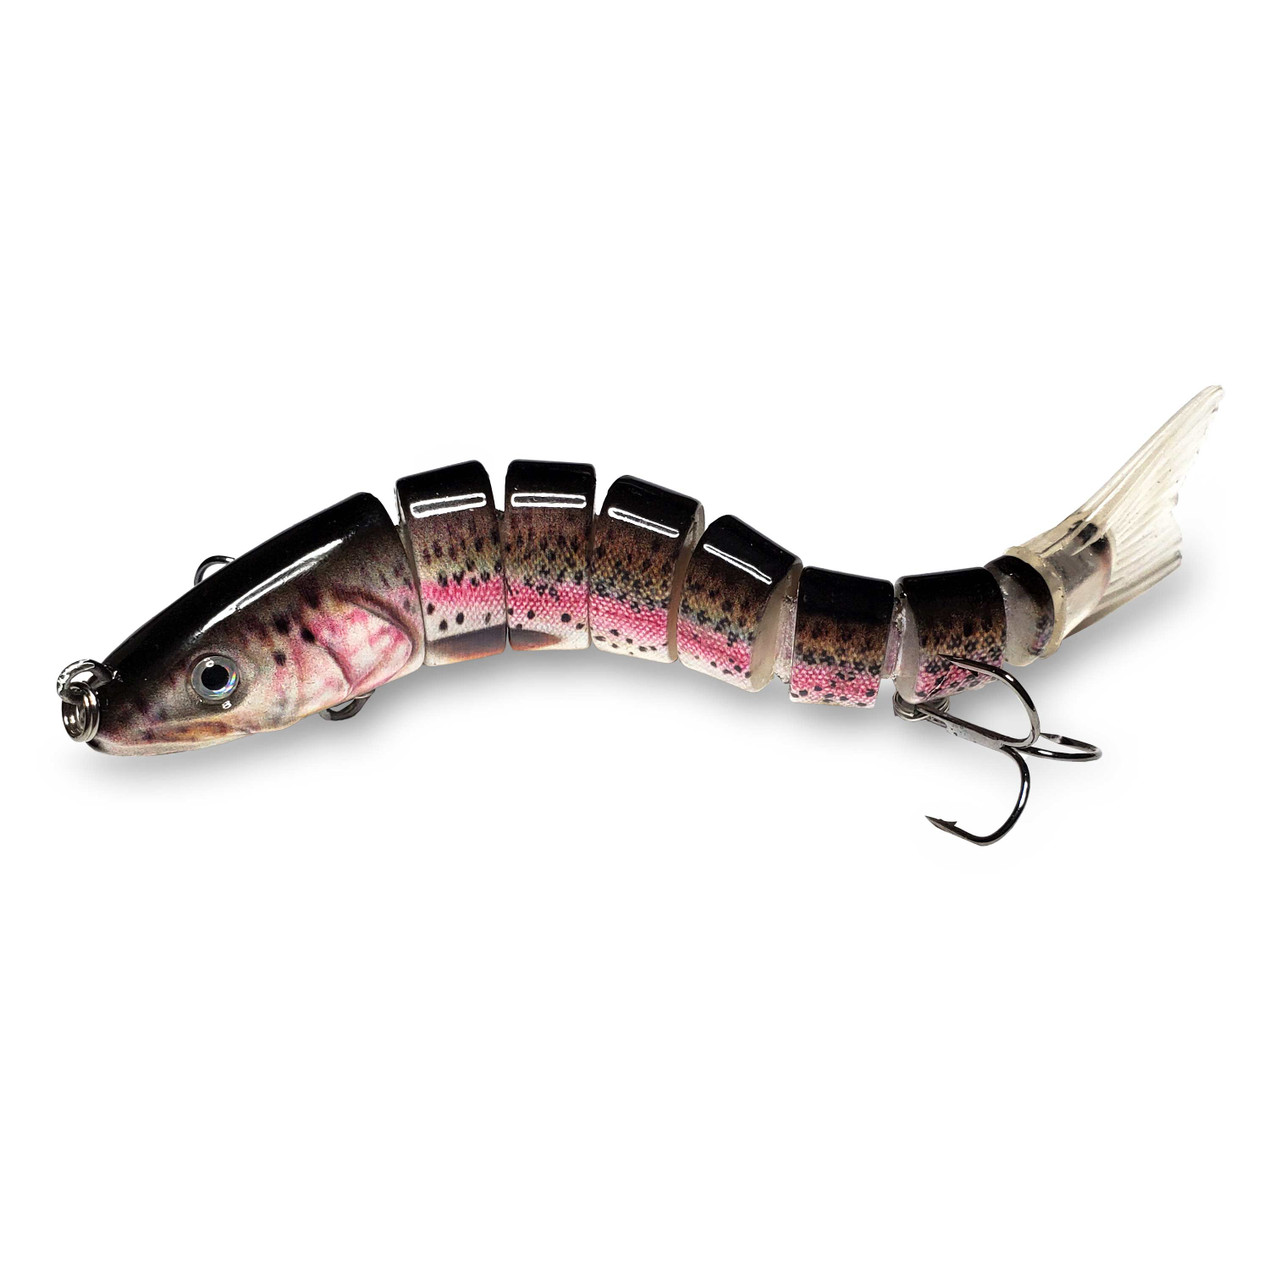 Trout Swimbaits, 5.5 8 Segments. 2 Lures, 2 colors. Soft Tail, 2